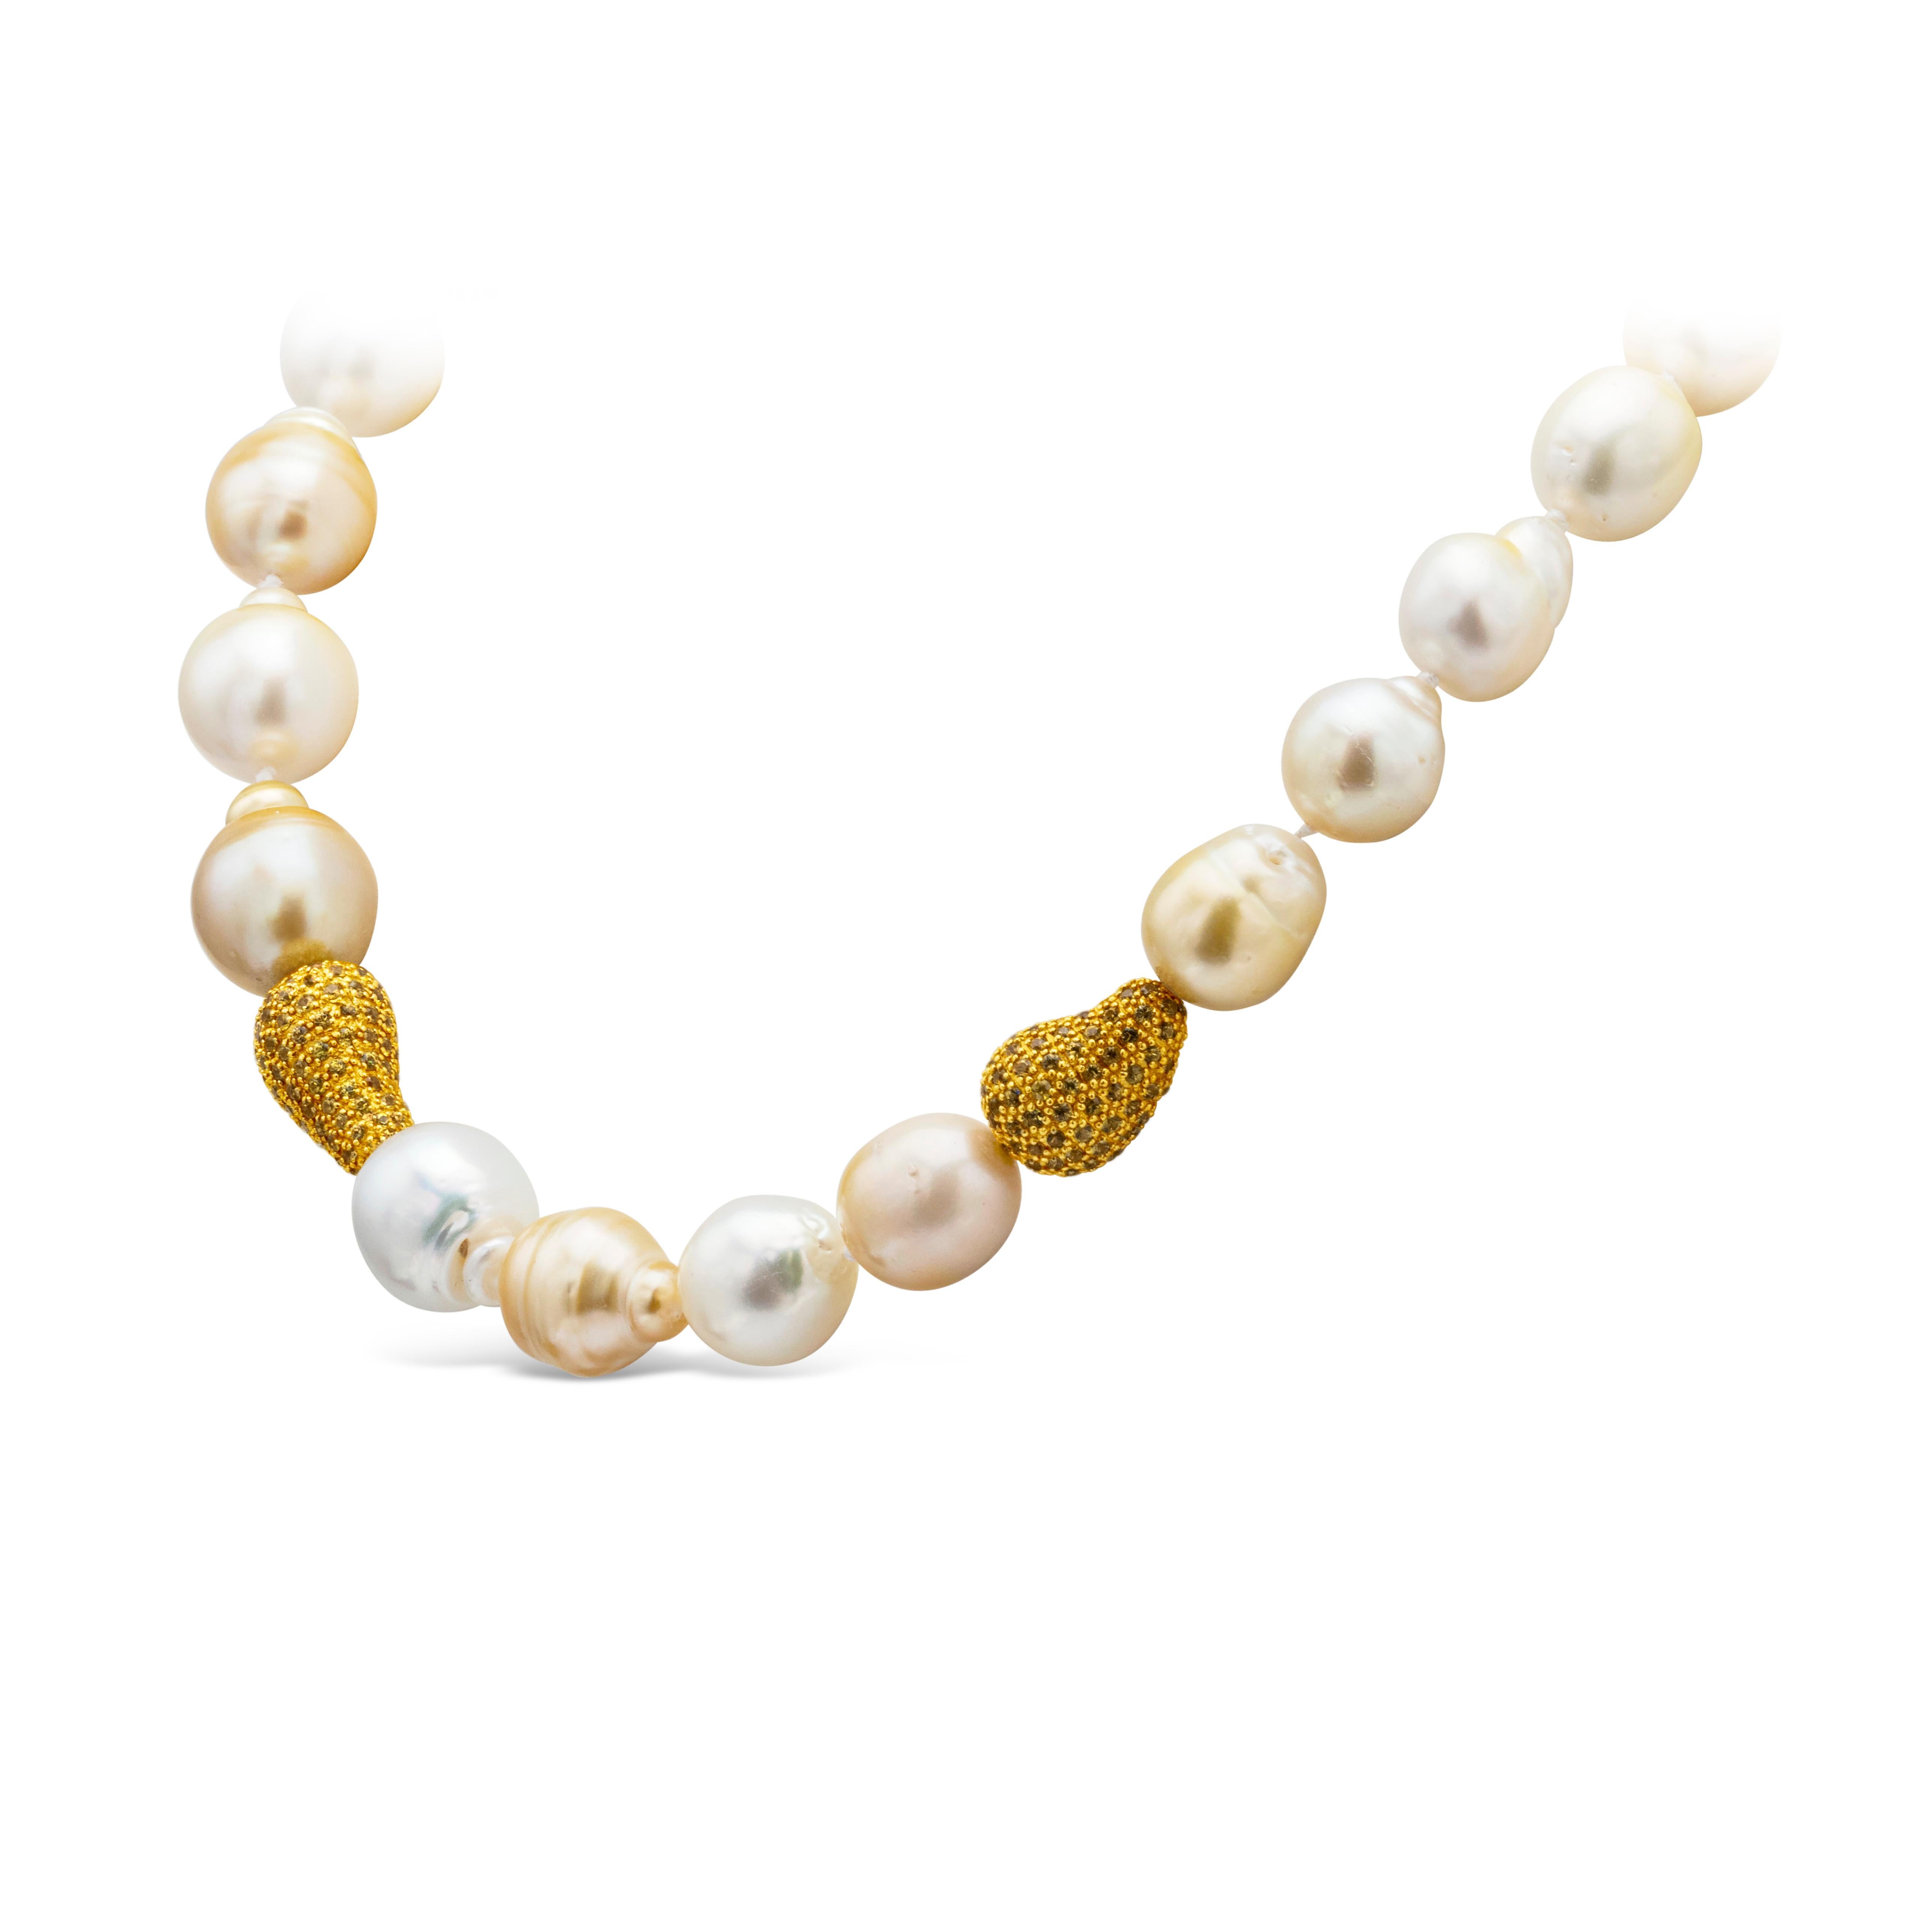 Magnificent necklace showcases 22 pieces of South Sea golden and white baroque Pearls. These beautiful pearls are approximately 12.2-15.3mm diameter and Perfectly offset by the yellow sapphire pave clasps.